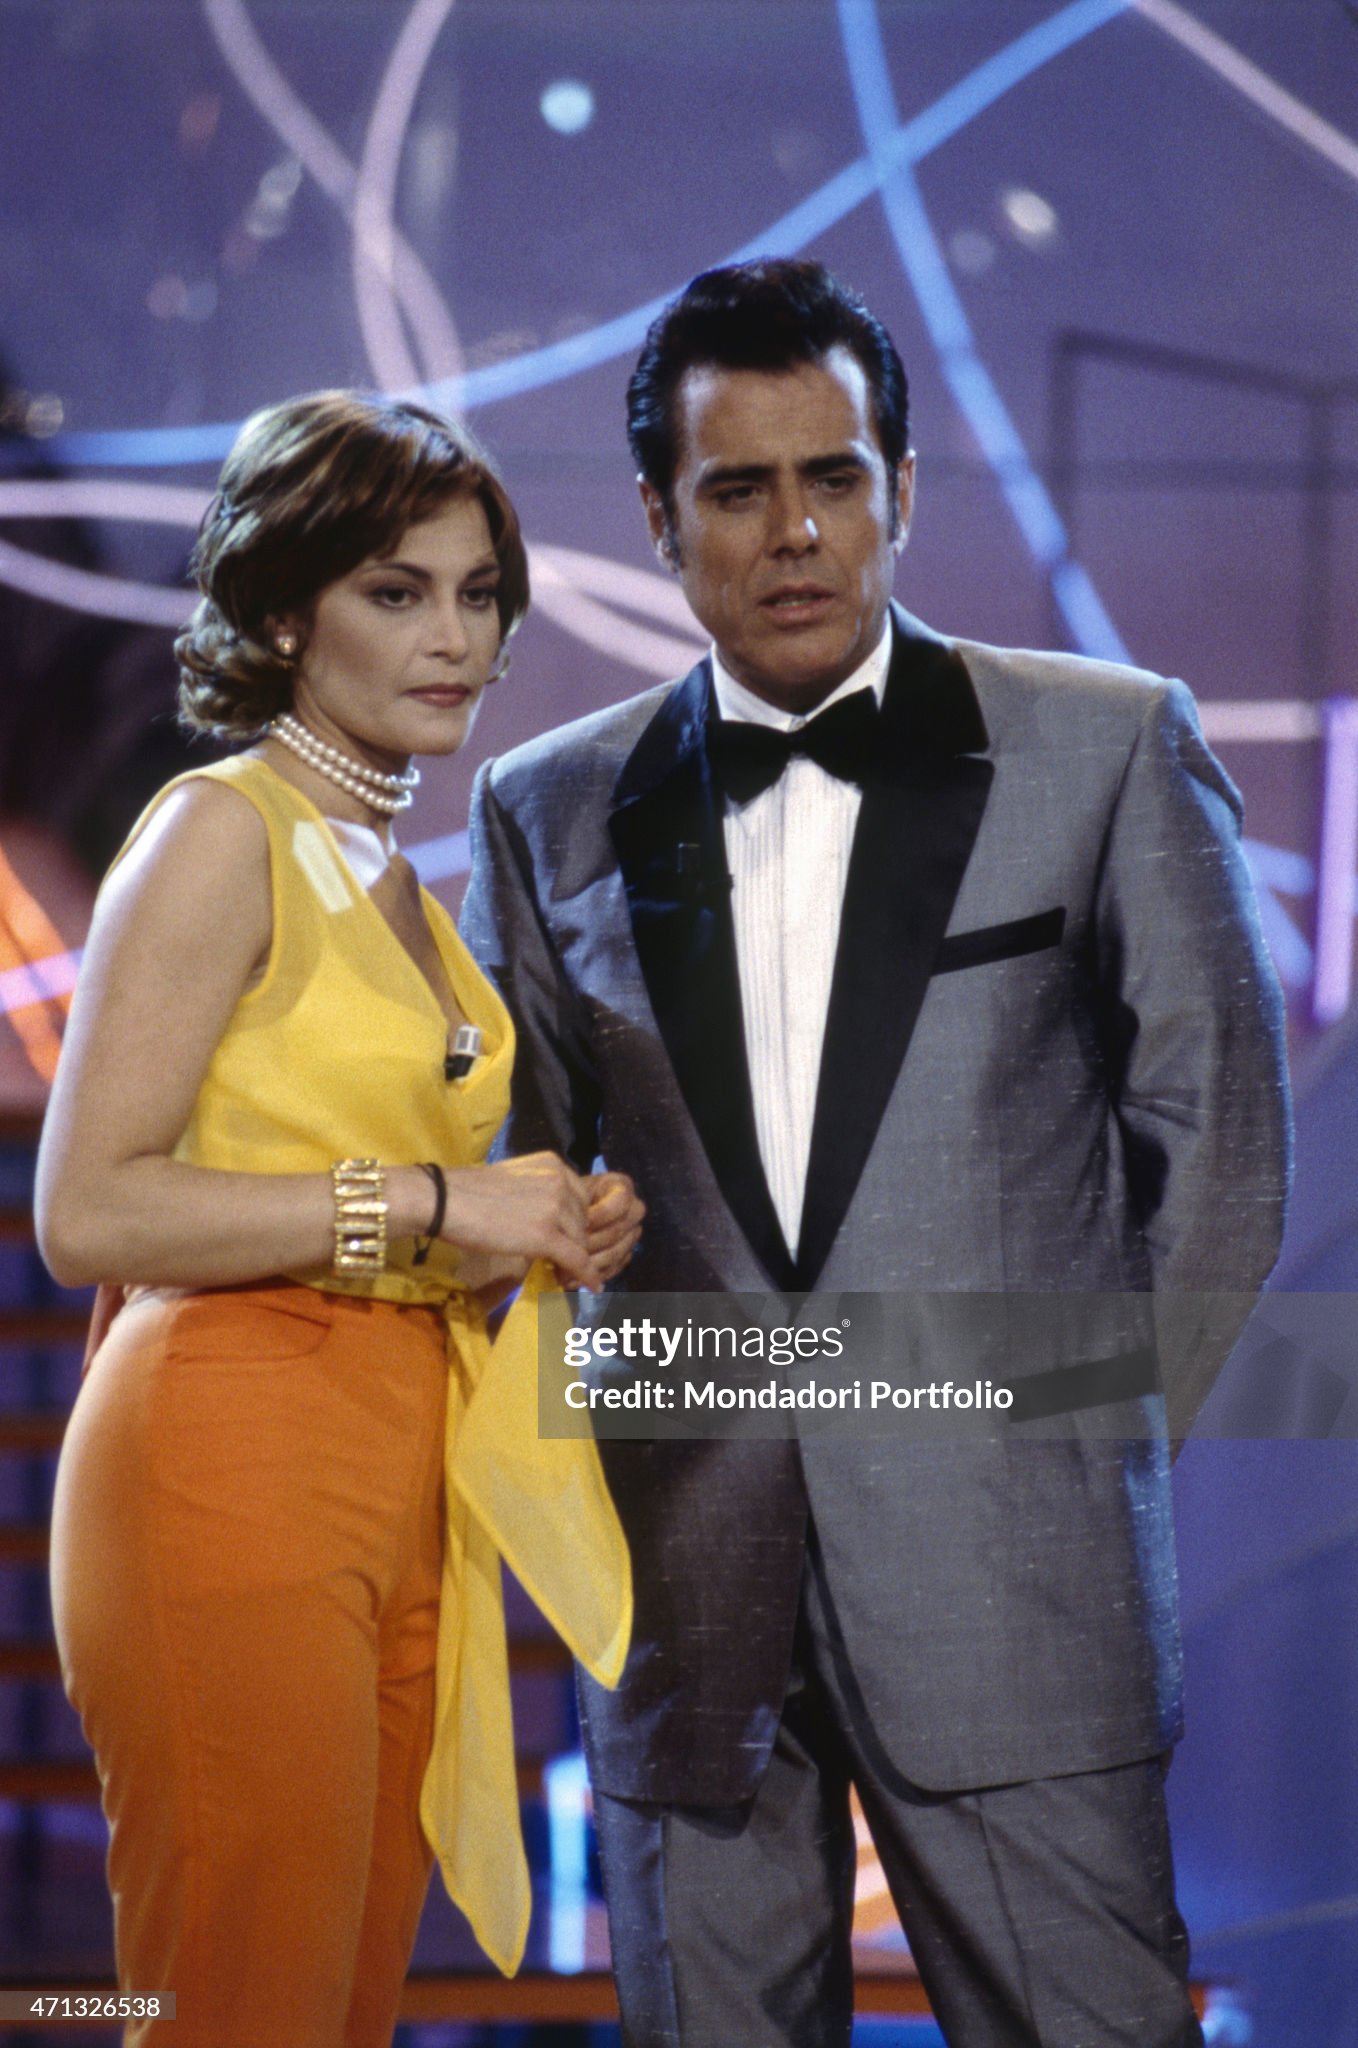 Teo Teocoli and Italian TV presenter, showgirl and actress Simona Ventura presenting the TV variery show Il boom in Italy in 1996. 